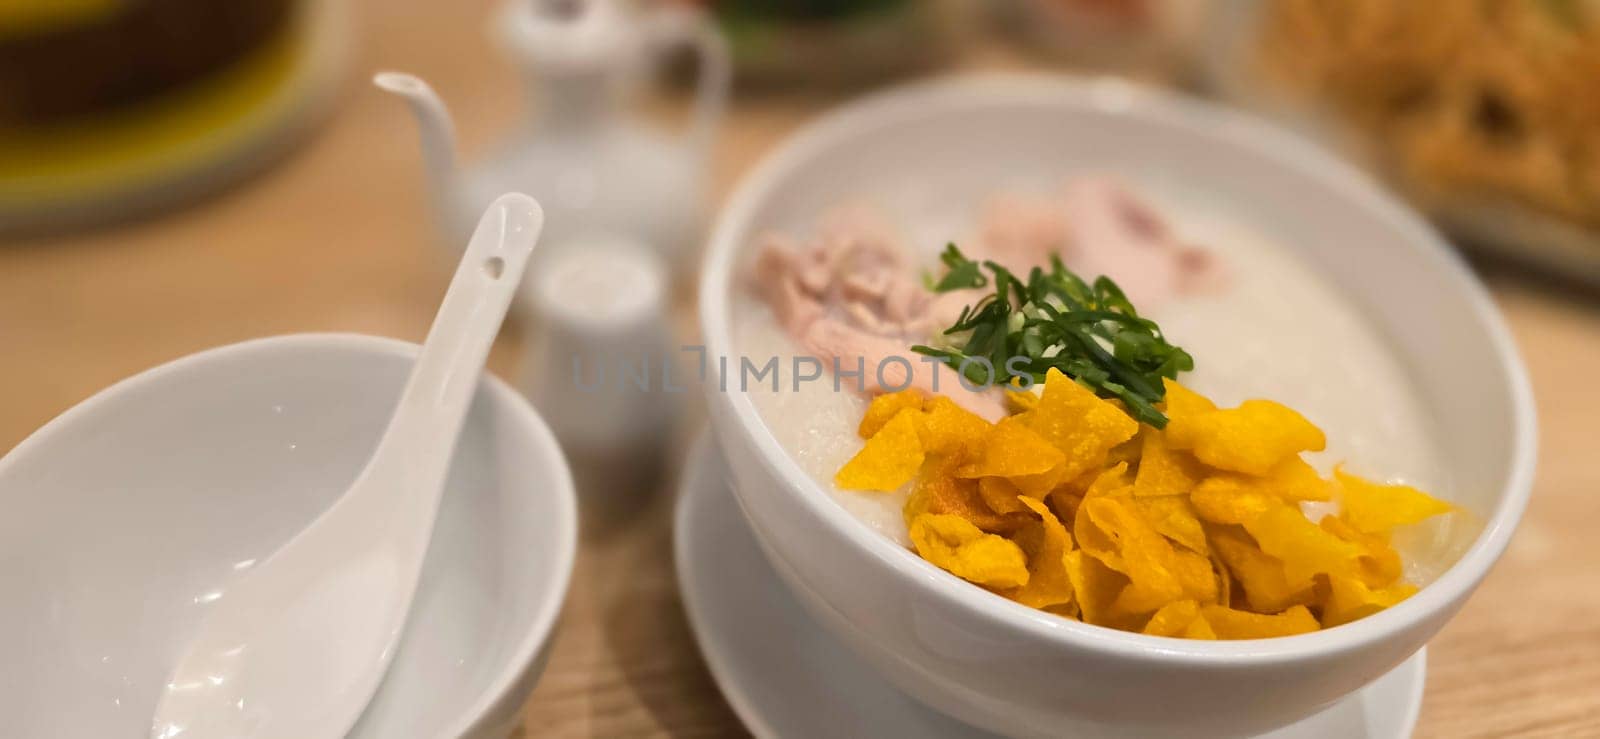 rice porridge with shredded chicken called bubur ayam served with crackers and sliced spring onion and others condiments by antoksena